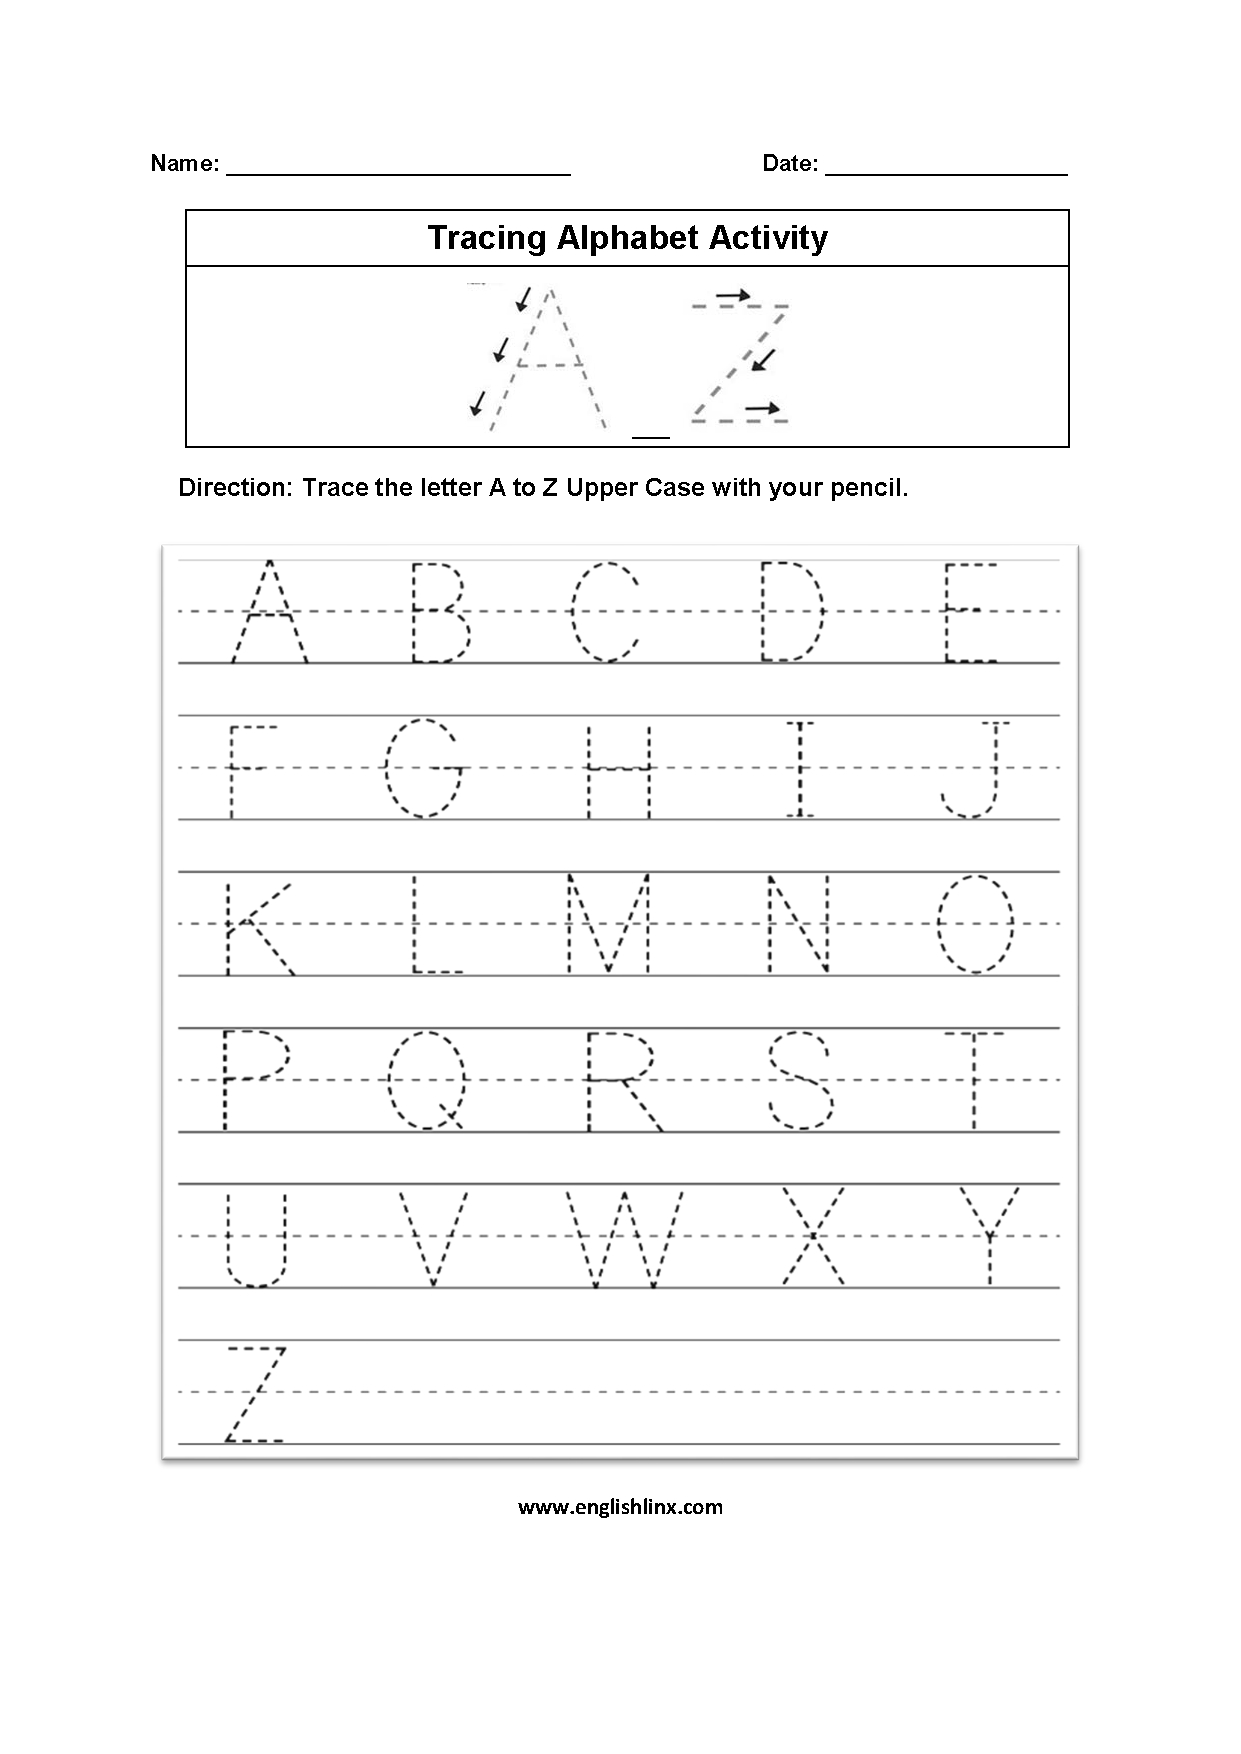 Worksheets : Practice Writing Alphabettters Worksheets To regarding Letter Tracing Activity Worksheets